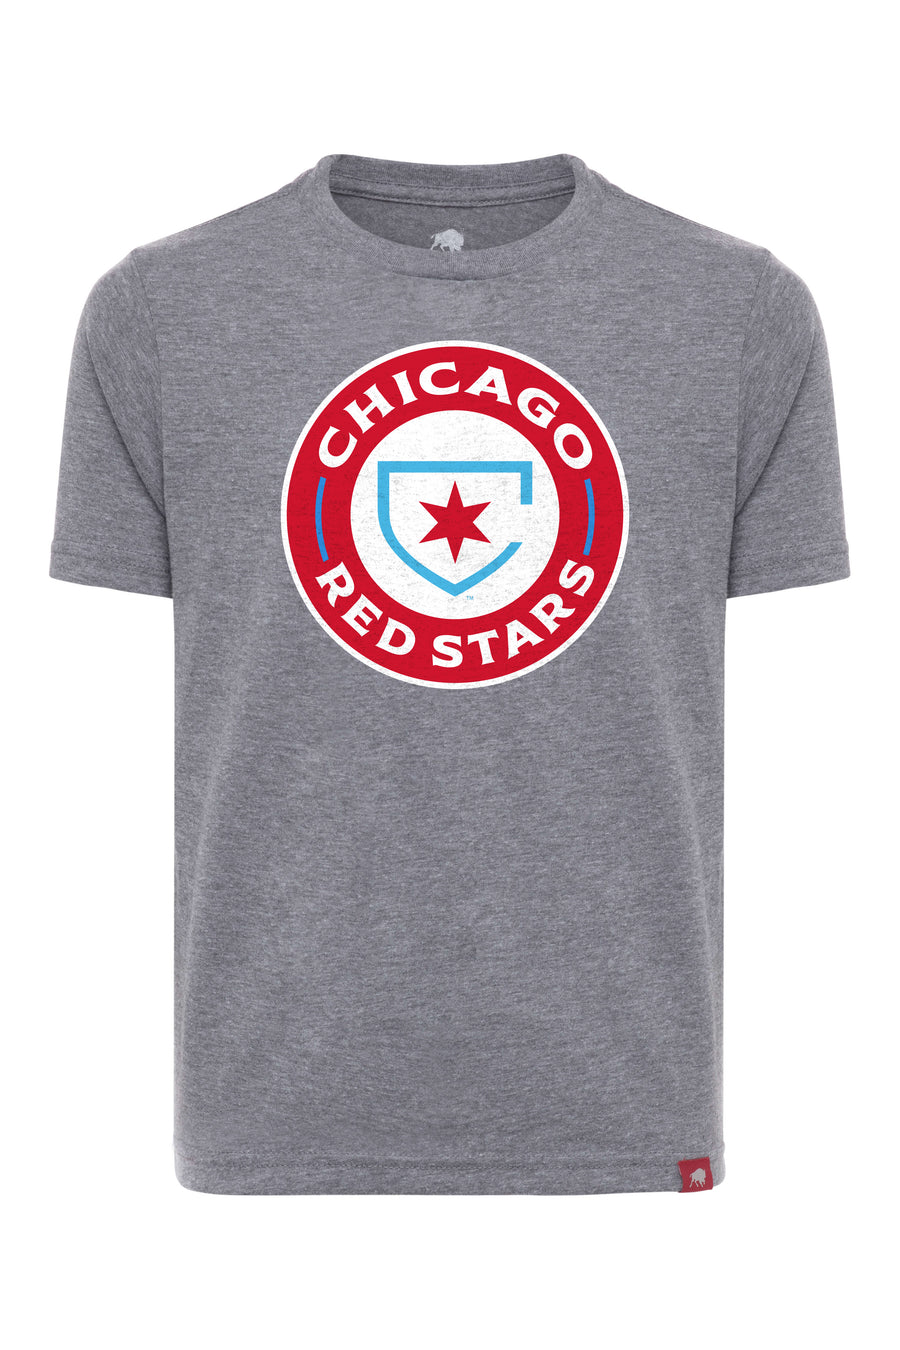 Chicago Red Stars Sportiqe Youth Gray Circle Tee